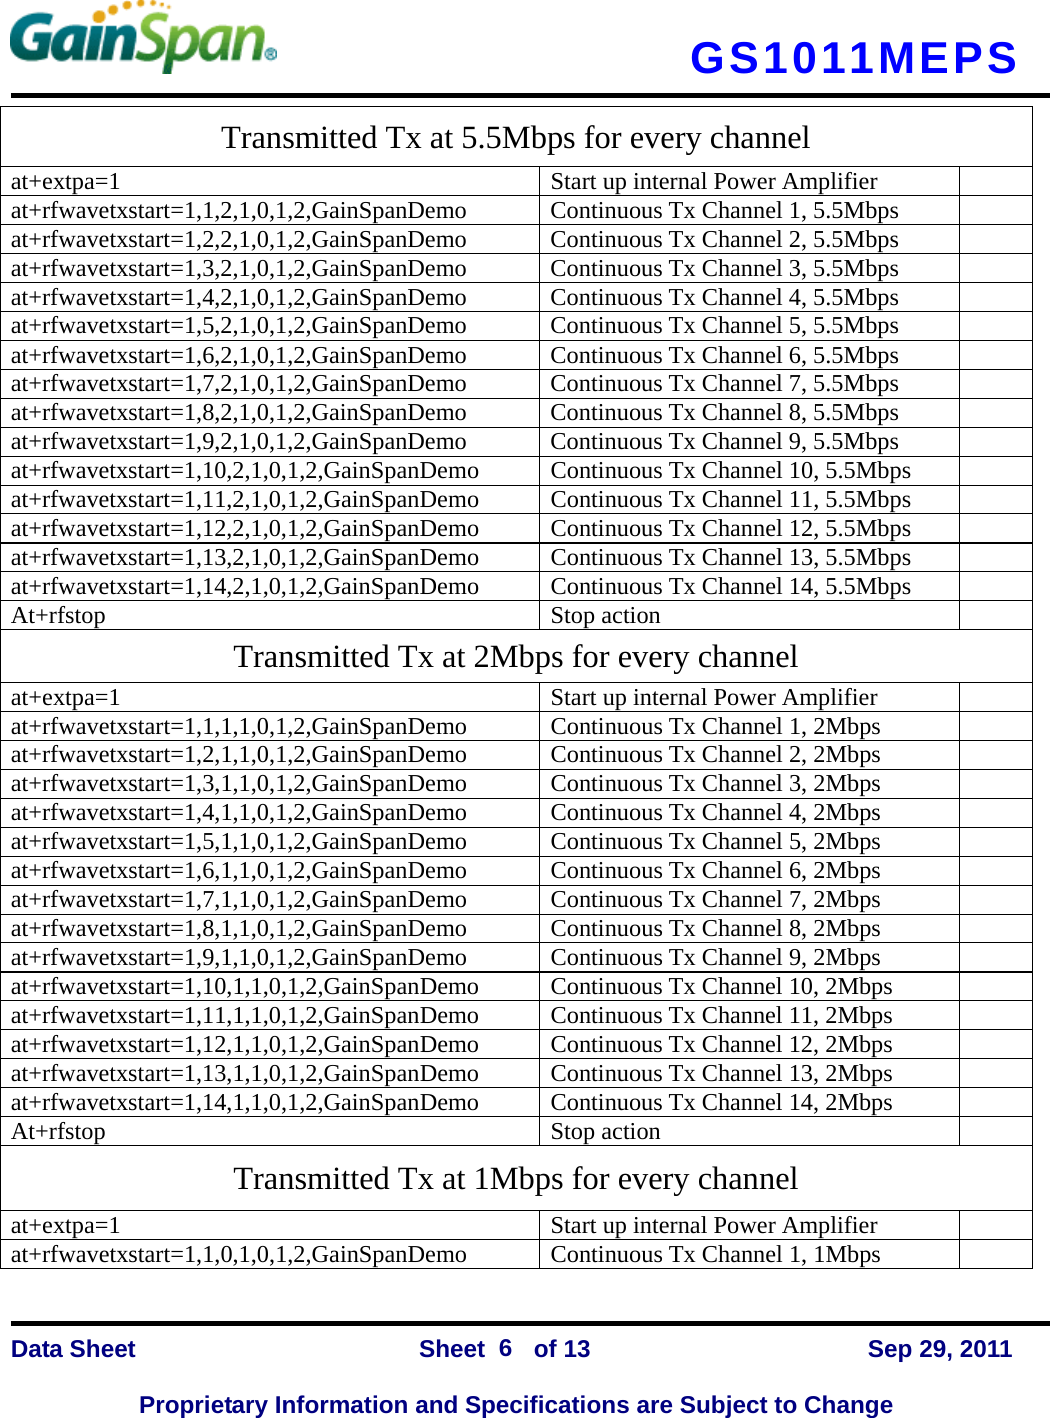   GS1011MEPS    Data Sheet                Sheet    of 13      Sep 29, 2011  Proprietary Information and Specifications are Subject to Change 6 Transmitted Tx at 5.5Mbps for every channel at+extpa=1  Start up internal Power Amplifier   at+rfwavetxstart=1,1,2,1,0,1,2,GainSpanDemo  Continuous Tx Channel 1, 5.5Mbps   at+rfwavetxstart=1,2,2,1,0,1,2,GainSpanDemo  Continuous Tx Channel 2, 5.5Mbps   at+rfwavetxstart=1,3,2,1,0,1,2,GainSpanDemo  Continuous Tx Channel 3, 5.5Mbps   at+rfwavetxstart=1,4,2,1,0,1,2,GainSpanDemo  Continuous Tx Channel 4, 5.5Mbps   at+rfwavetxstart=1,5,2,1,0,1,2,GainSpanDemo  Continuous Tx Channel 5, 5.5Mbps   at+rfwavetxstart=1,6,2,1,0,1,2,GainSpanDemo  Continuous Tx Channel 6, 5.5Mbps   at+rfwavetxstart=1,7,2,1,0,1,2,GainSpanDemo  Continuous Tx Channel 7, 5.5Mbps   at+rfwavetxstart=1,8,2,1,0,1,2,GainSpanDemo  Continuous Tx Channel 8, 5.5Mbps   at+rfwavetxstart=1,9,2,1,0,1,2,GainSpanDemo  Continuous Tx Channel 9, 5.5Mbps   at+rfwavetxstart=1,10,2,1,0,1,2,GainSpanDemo  Continuous Tx Channel 10, 5.5Mbps   at+rfwavetxstart=1,11,2,1,0,1,2,GainSpanDemo  Continuous Tx Channel 11, 5.5Mbps   at+rfwavetxstart=1,12,2,1,0,1,2,GainSpanDemo  Continuous Tx Channel 12, 5.5Mbps   at+rfwavetxstart=1,13,2,1,0,1,2,GainSpanDemo  Continuous Tx Channel 13, 5.5Mbps   at+rfwavetxstart=1,14,2,1,0,1,2,GainSpanDemo  Continuous Tx Channel 14, 5.5Mbps   At+rfstop Stop action  Transmitted Tx at 2Mbps for every channel at+extpa=1  Start up internal Power Amplifier   at+rfwavetxstart=1,1,1,1,0,1,2,GainSpanDemo  Continuous Tx Channel 1, 2Mbps   at+rfwavetxstart=1,2,1,1,0,1,2,GainSpanDemo  Continuous Tx Channel 2, 2Mbps   at+rfwavetxstart=1,3,1,1,0,1,2,GainSpanDemo  Continuous Tx Channel 3, 2Mbps   at+rfwavetxstart=1,4,1,1,0,1,2,GainSpanDemo  Continuous Tx Channel 4, 2Mbps   at+rfwavetxstart=1,5,1,1,0,1,2,GainSpanDemo  Continuous Tx Channel 5, 2Mbps   at+rfwavetxstart=1,6,1,1,0,1,2,GainSpanDemo  Continuous Tx Channel 6, 2Mbps   at+rfwavetxstart=1,7,1,1,0,1,2,GainSpanDemo  Continuous Tx Channel 7, 2Mbps   at+rfwavetxstart=1,8,1,1,0,1,2,GainSpanDemo  Continuous Tx Channel 8, 2Mbps   at+rfwavetxstart=1,9,1,1,0,1,2,GainSpanDemo  Continuous Tx Channel 9, 2Mbps   at+rfwavetxstart=1,10,1,1,0,1,2,GainSpanDemo  Continuous Tx Channel 10, 2Mbps   at+rfwavetxstart=1,11,1,1,0,1,2,GainSpanDemo  Continuous Tx Channel 11, 2Mbps   at+rfwavetxstart=1,12,1,1,0,1,2,GainSpanDemo  Continuous Tx Channel 12, 2Mbps   at+rfwavetxstart=1,13,1,1,0,1,2,GainSpanDemo  Continuous Tx Channel 13, 2Mbps   at+rfwavetxstart=1,14,1,1,0,1,2,GainSpanDemo  Continuous Tx Channel 14, 2Mbps   At+rfstop Stop action  Transmitted Tx at 1Mbps for every channel at+extpa=1  Start up internal Power Amplifier   at+rfwavetxstart=1,1,0,1,0,1,2,GainSpanDemo  Continuous Tx Channel 1, 1Mbps   